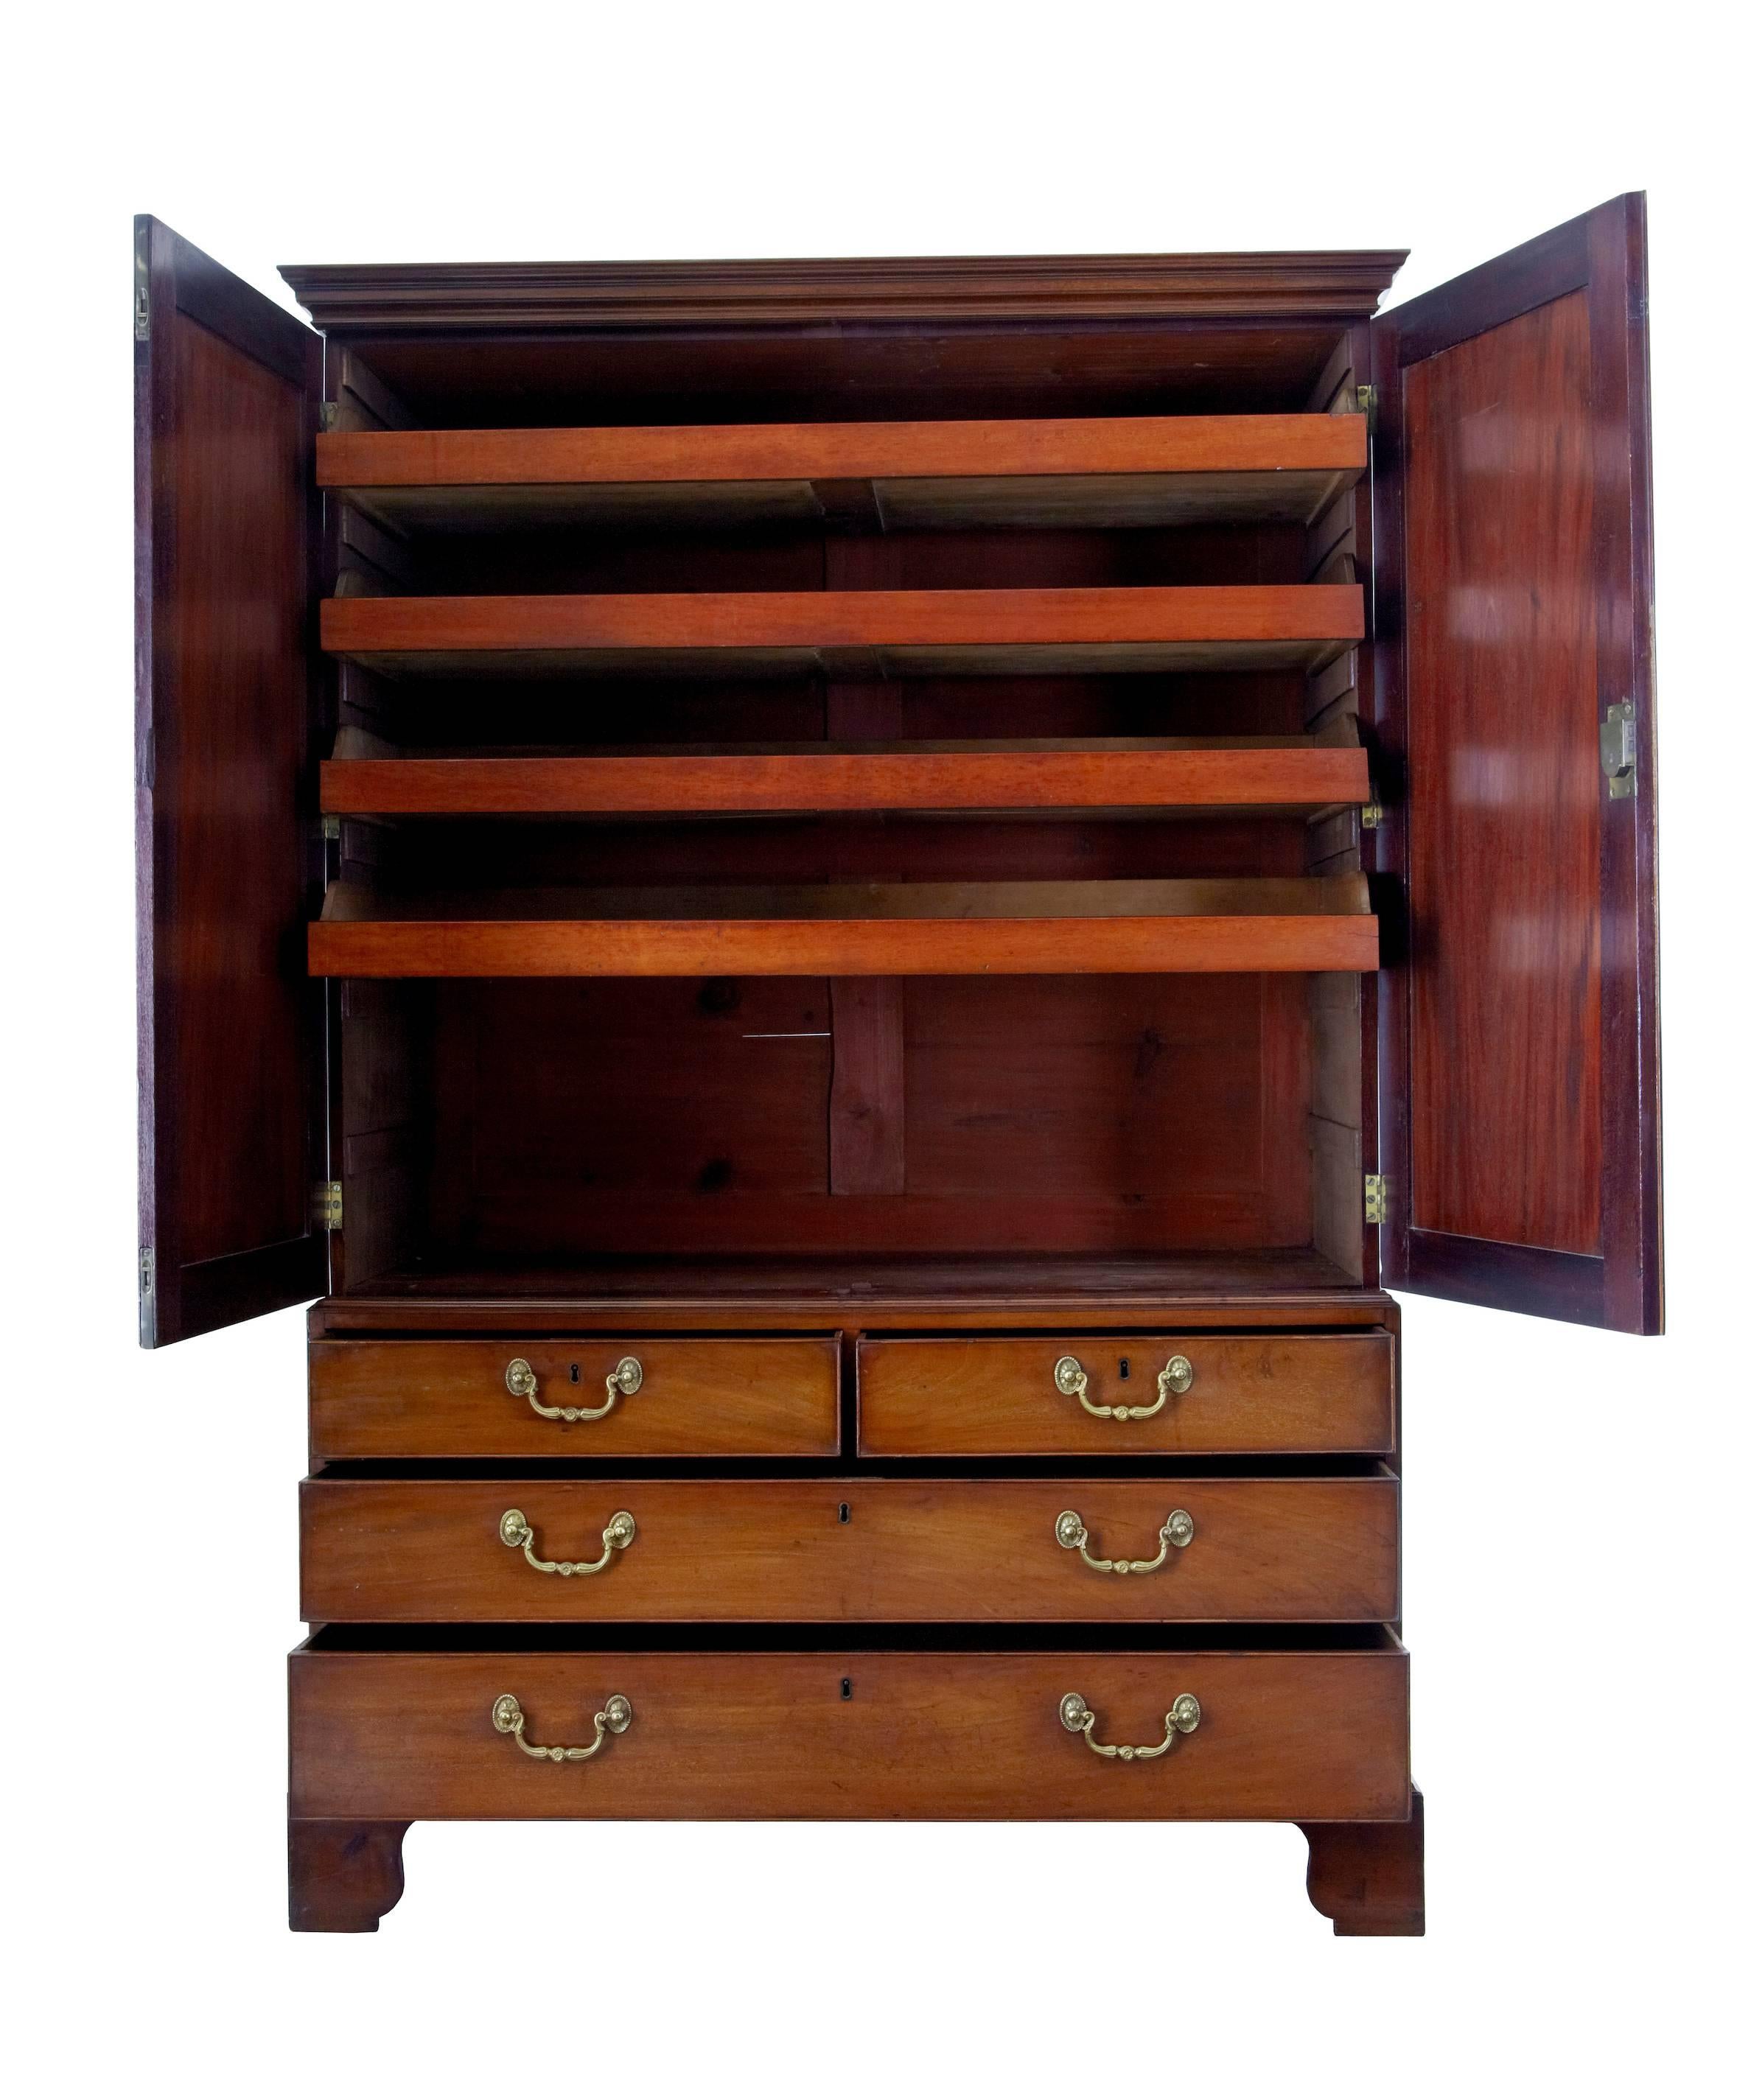 Late Georgian linen press, circa 1810.
Comprising of three parts, removable plinth, top section and base.
Double doors open to four sliding drawers, one of which is missing.
Bottom section of two over two drawers.
Standing on bracket feet.
Some